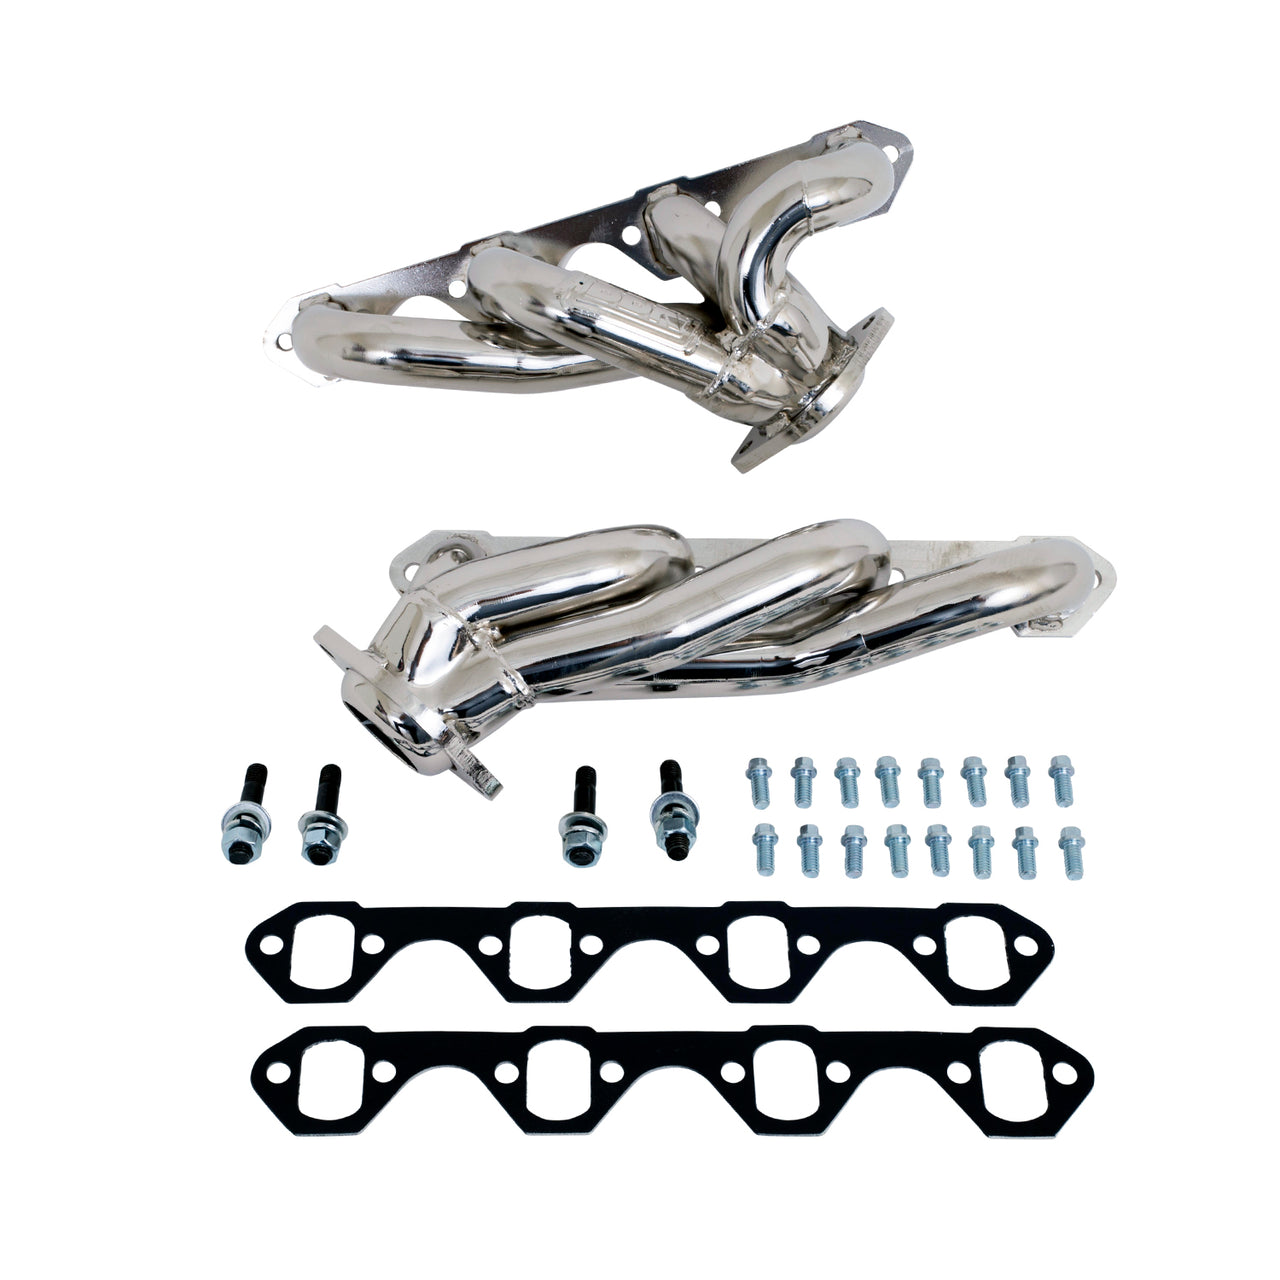 1987-1995 FORD F150 302 1-5/8 SHORTY HEADERS (POLISHED SILVER CERAMIC)